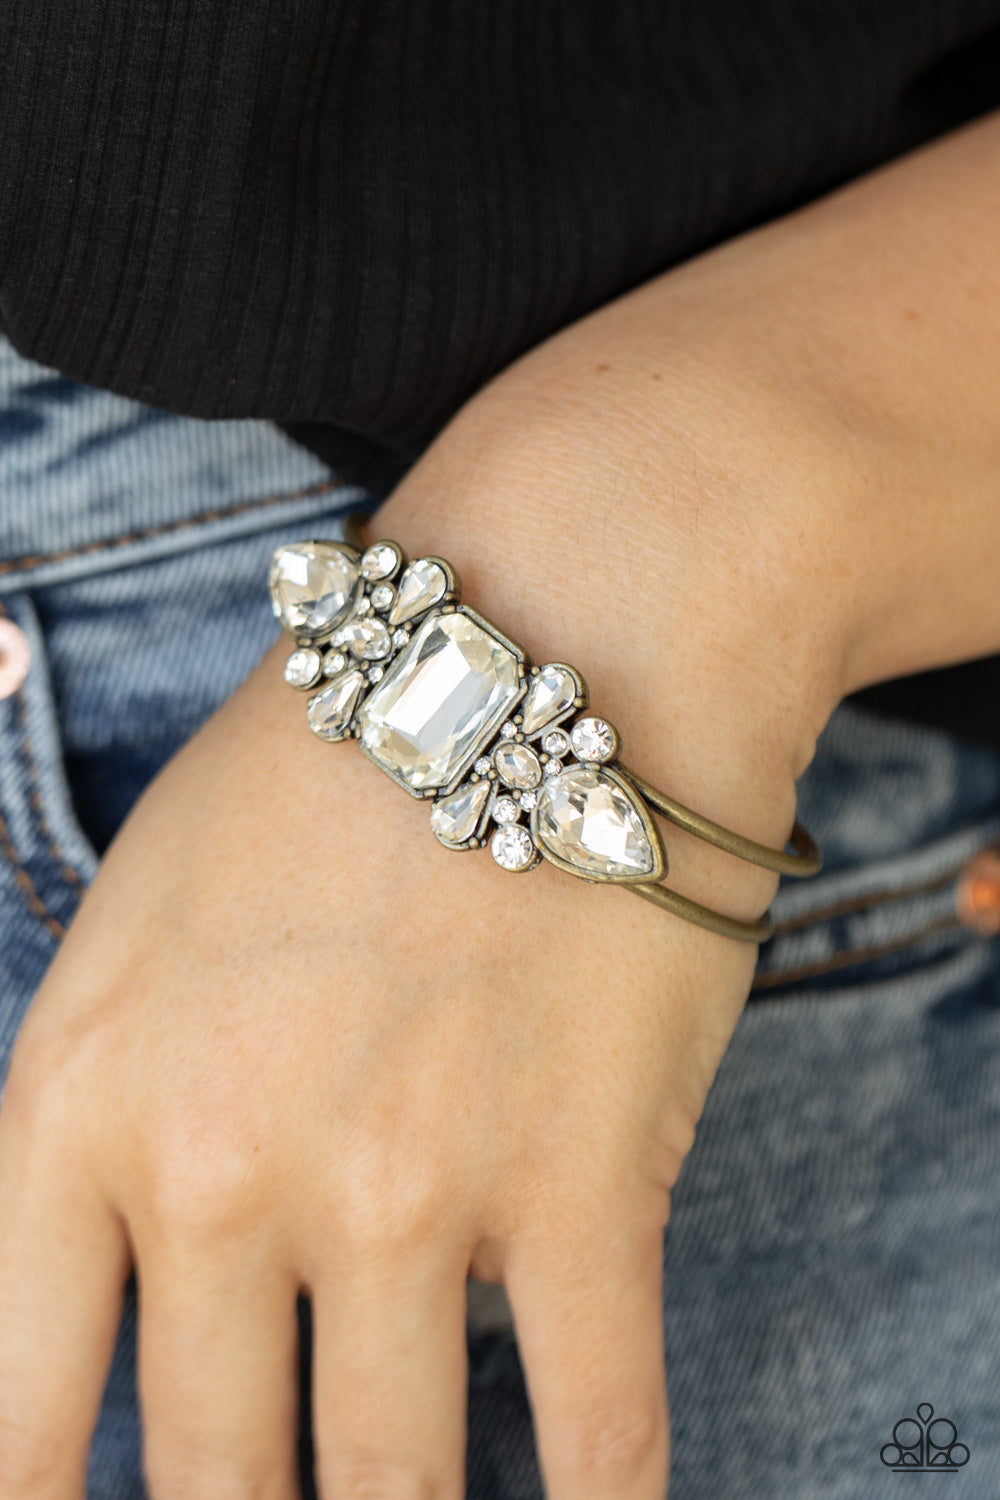 Call Me Old-Fashioned - brass - Paparazzi bracelet